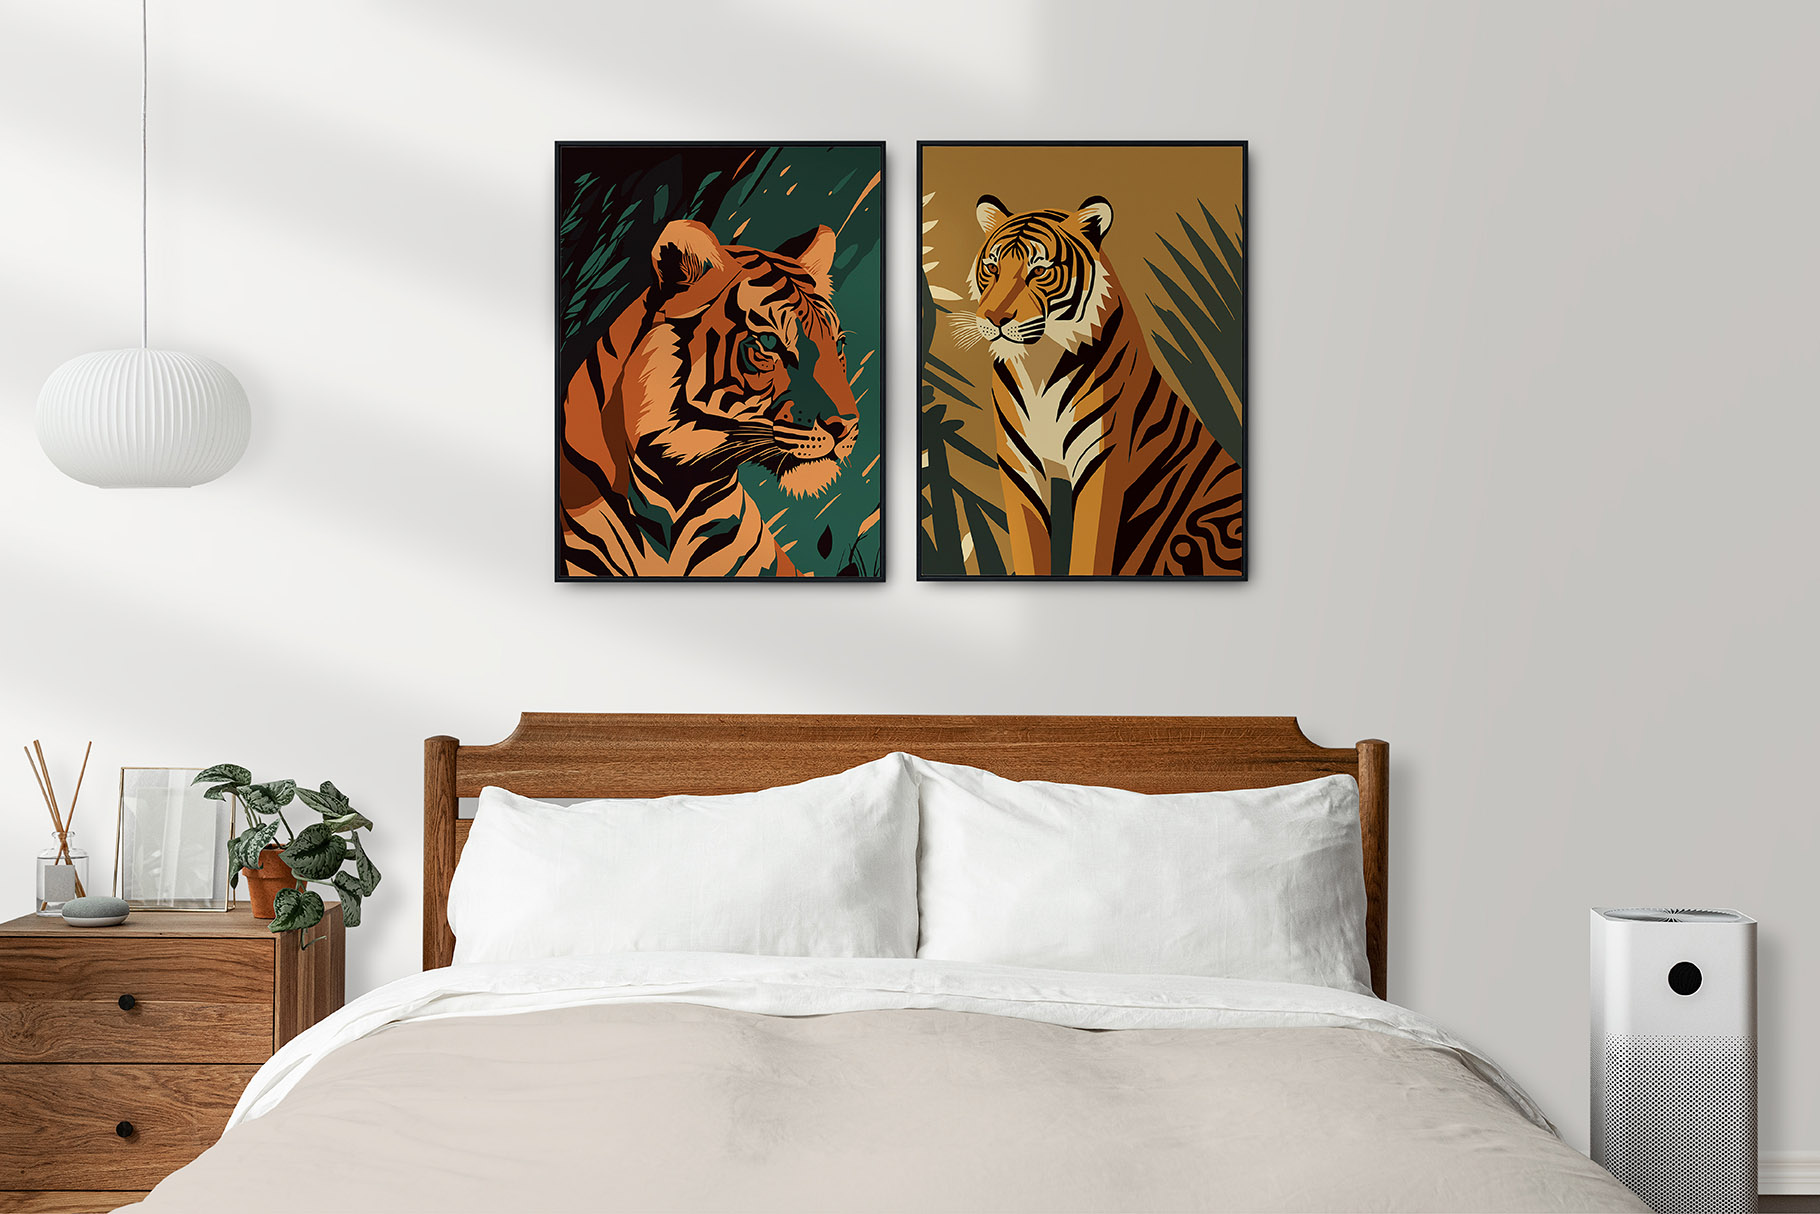 Two paintings of tigers on a wall above a bed.